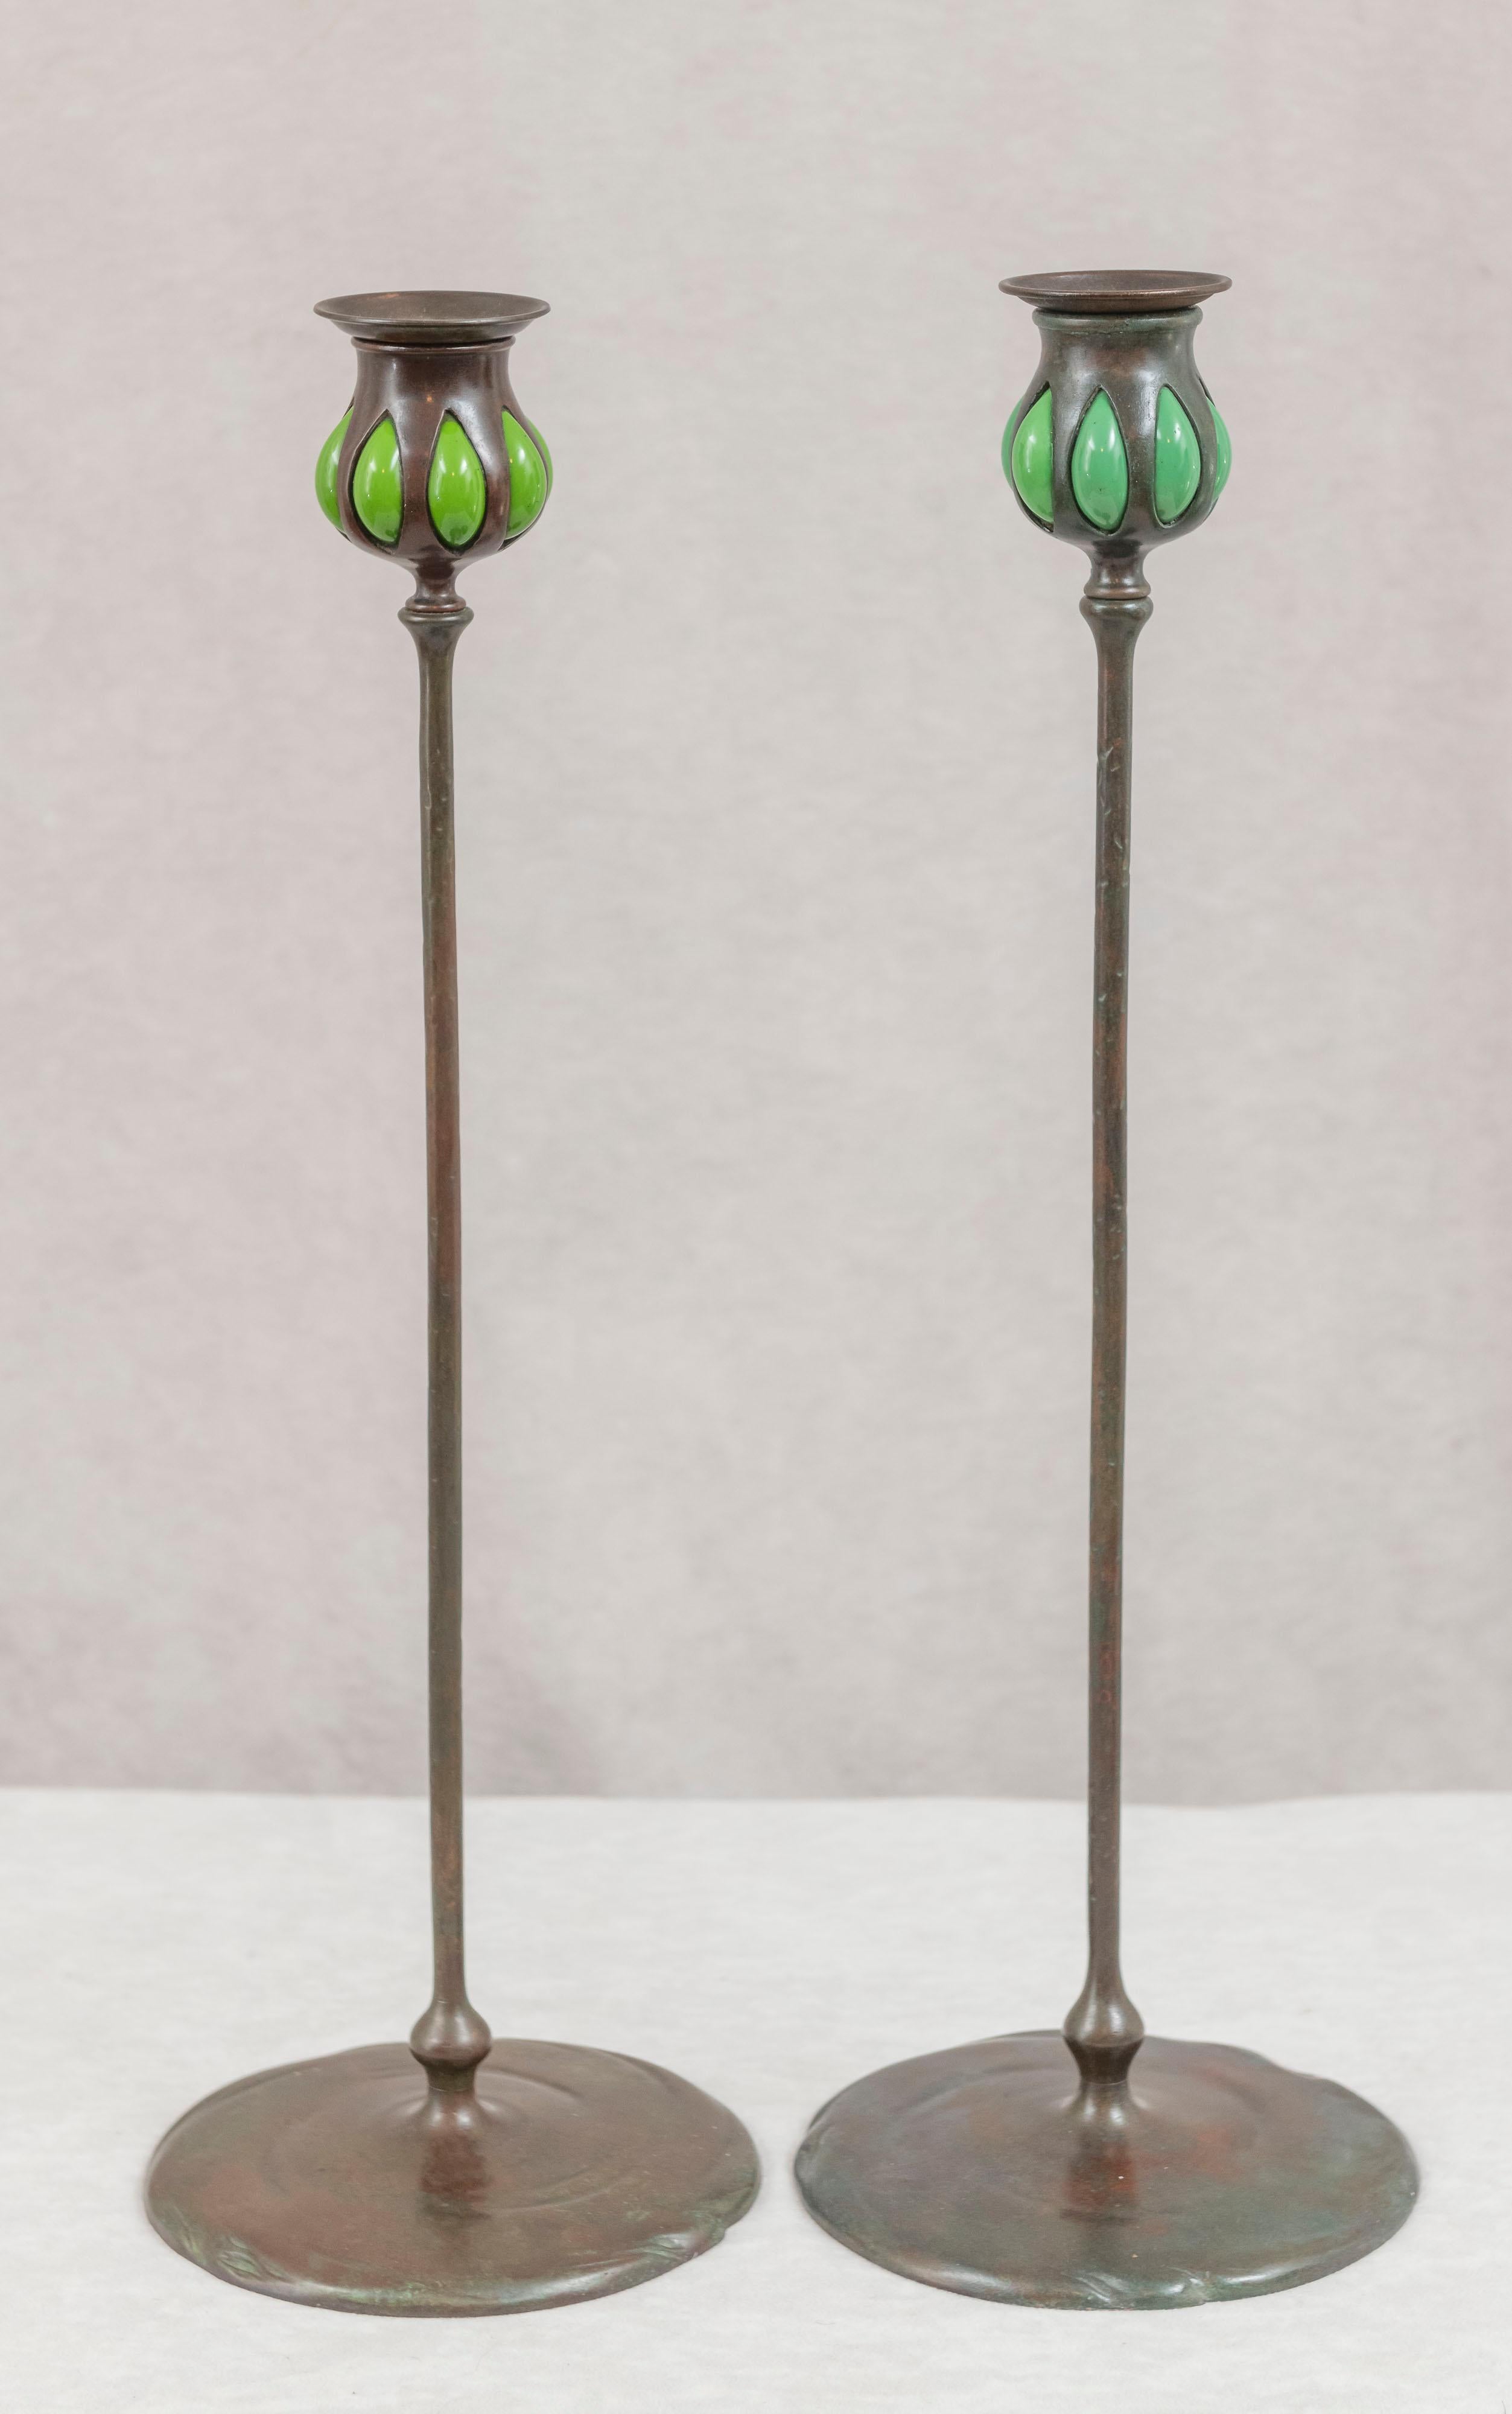 These long and graceful candlesticks were made by and signed by the famous Tiffany Studios. Louis Comfort Tiffany made more than just lamps, for those who are unaware of this fact. He did desk sets, clocks, and much more, and of course, in this case